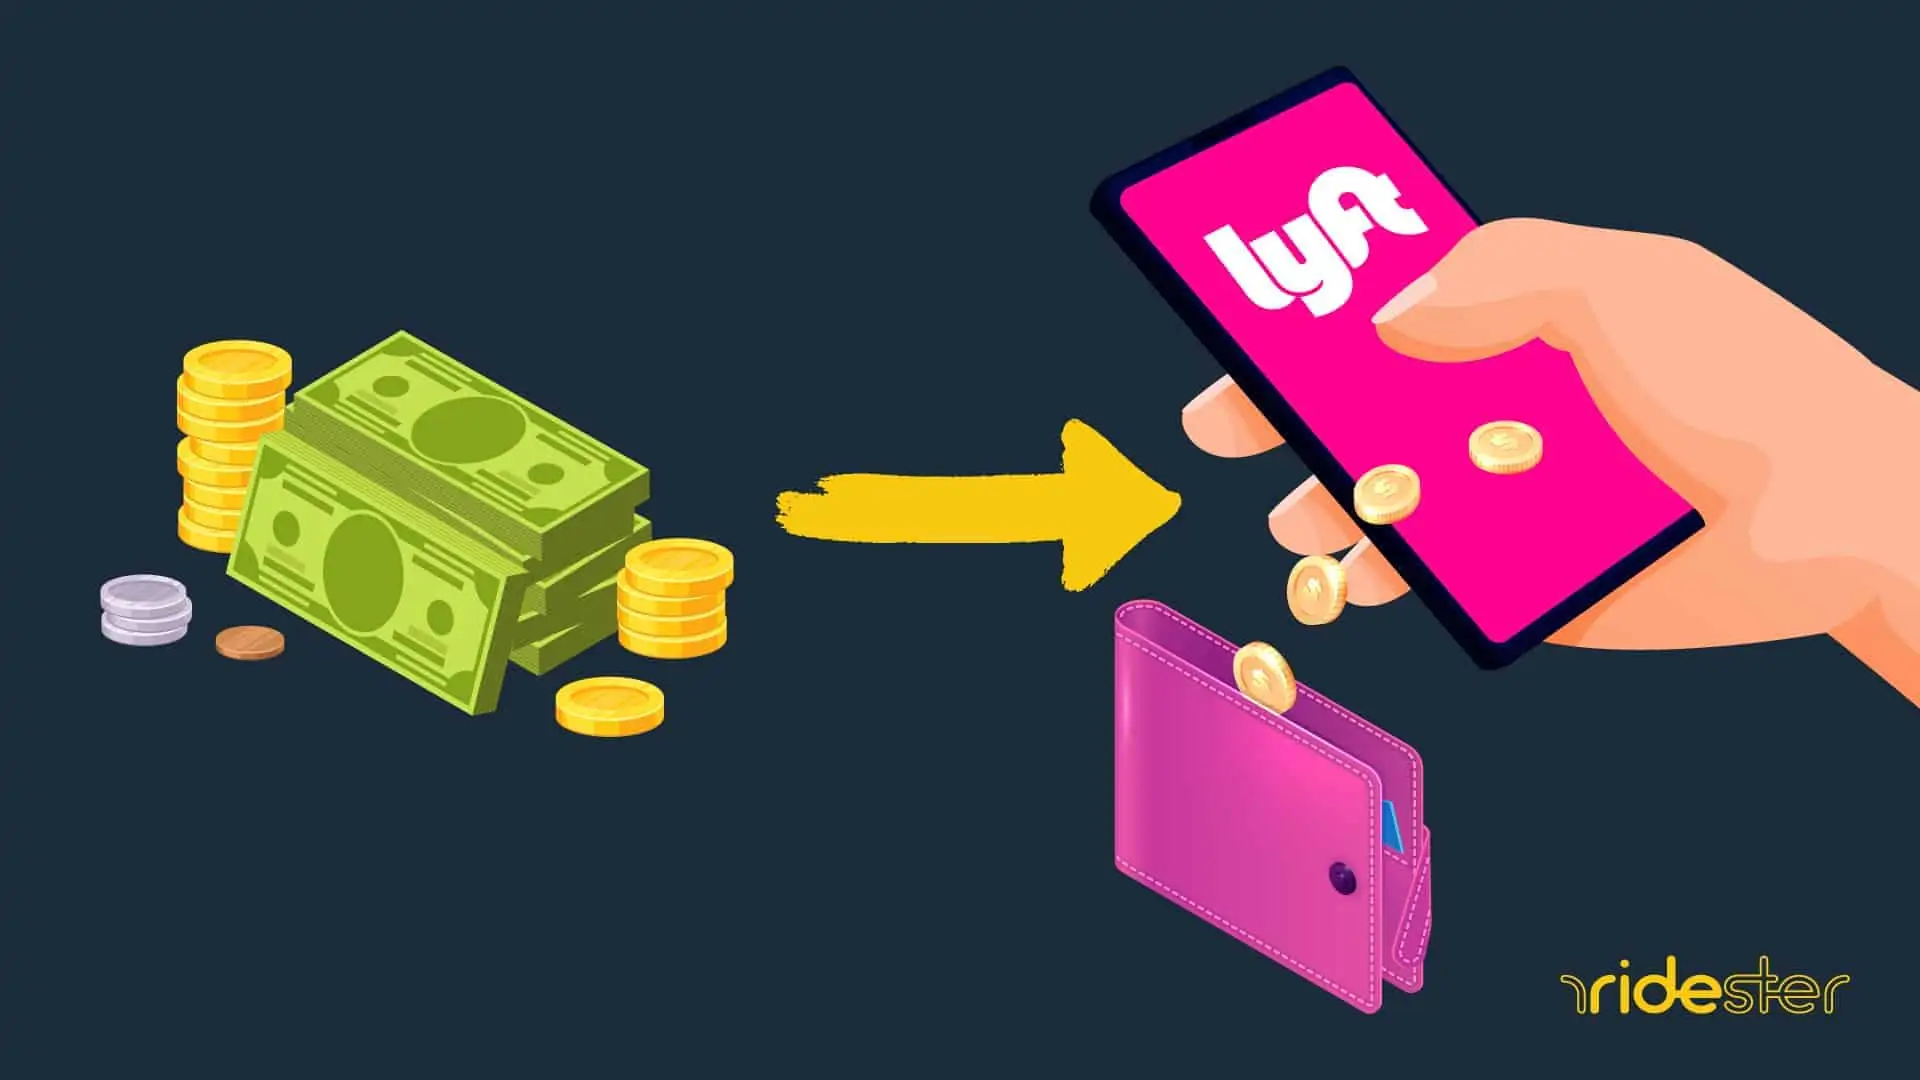 image showing money pointing at a lyft app and going into a wallet to demonstrate a lyft refund